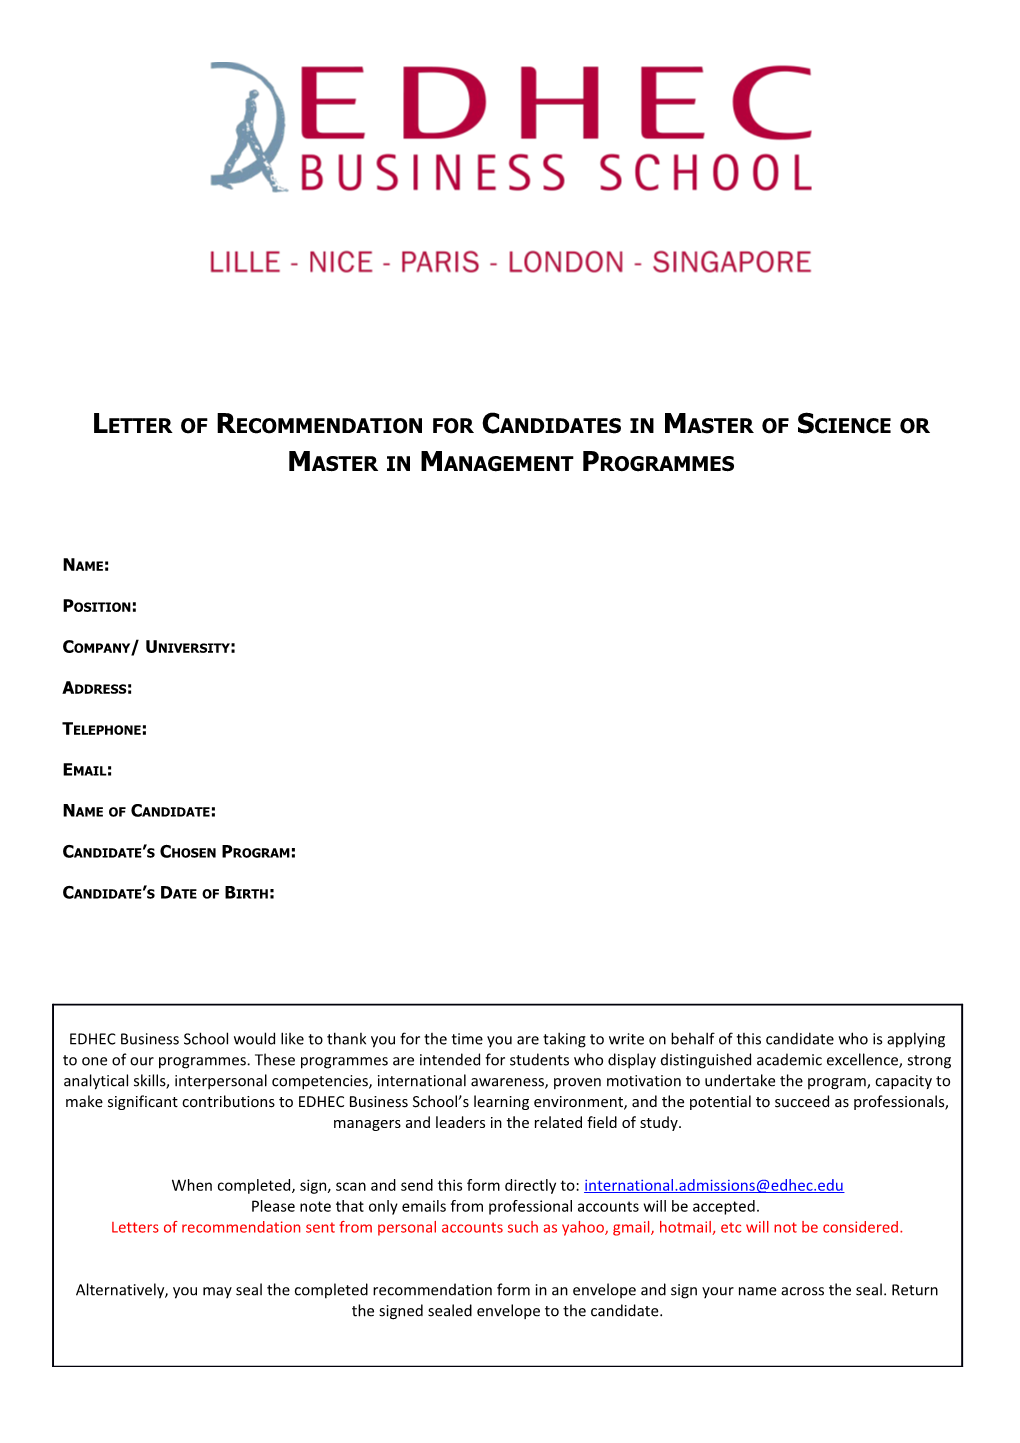 Letter of Recommendation for Candidates in Master of Science Or Master in Management Programmes